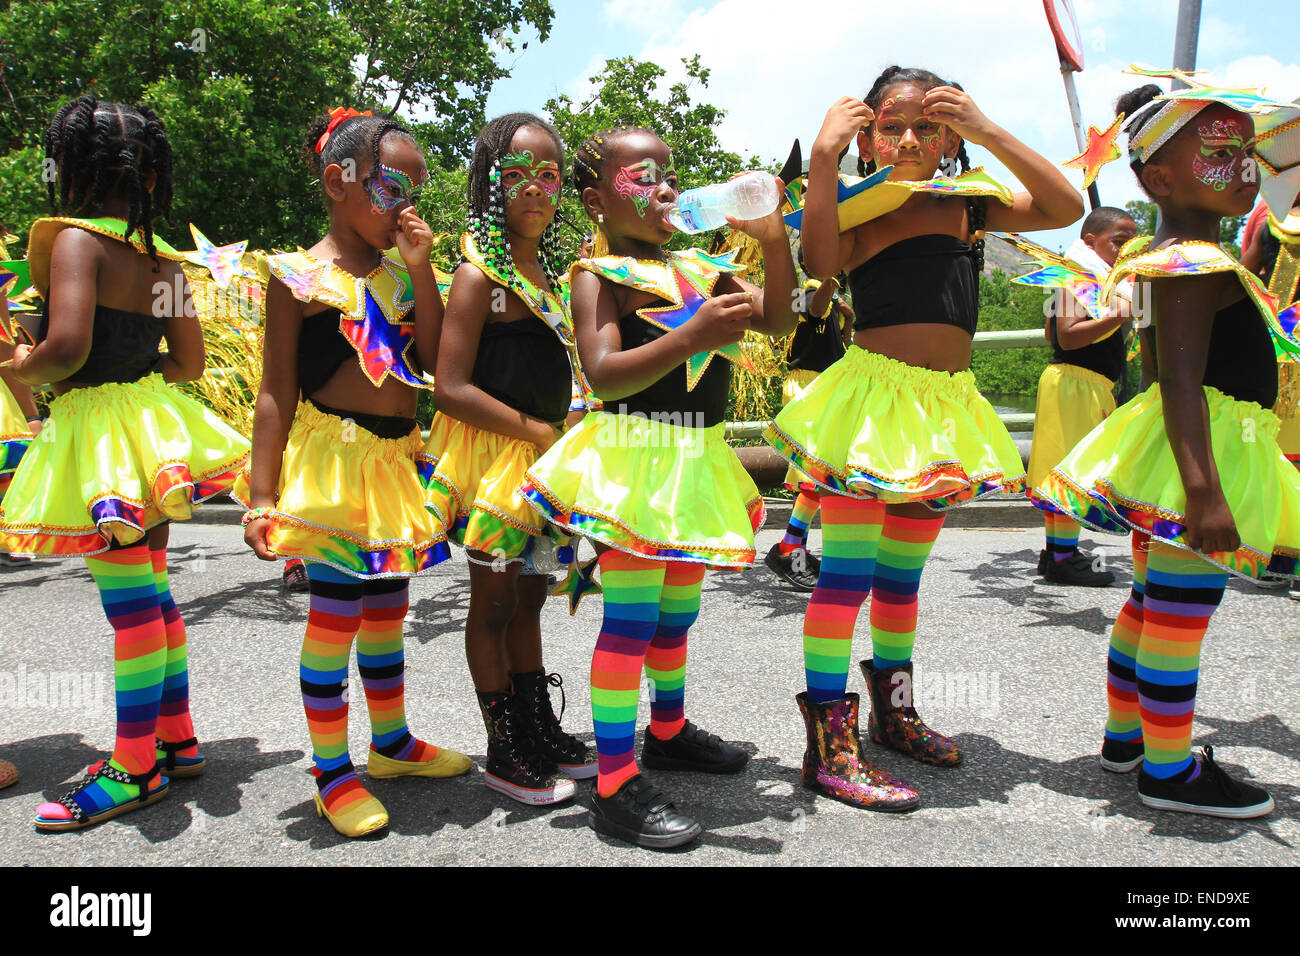 The Survivors junior troupe presented by Gebe portrays 'Shine You're a Star' during Carnival in St Maarten. Stock Photo